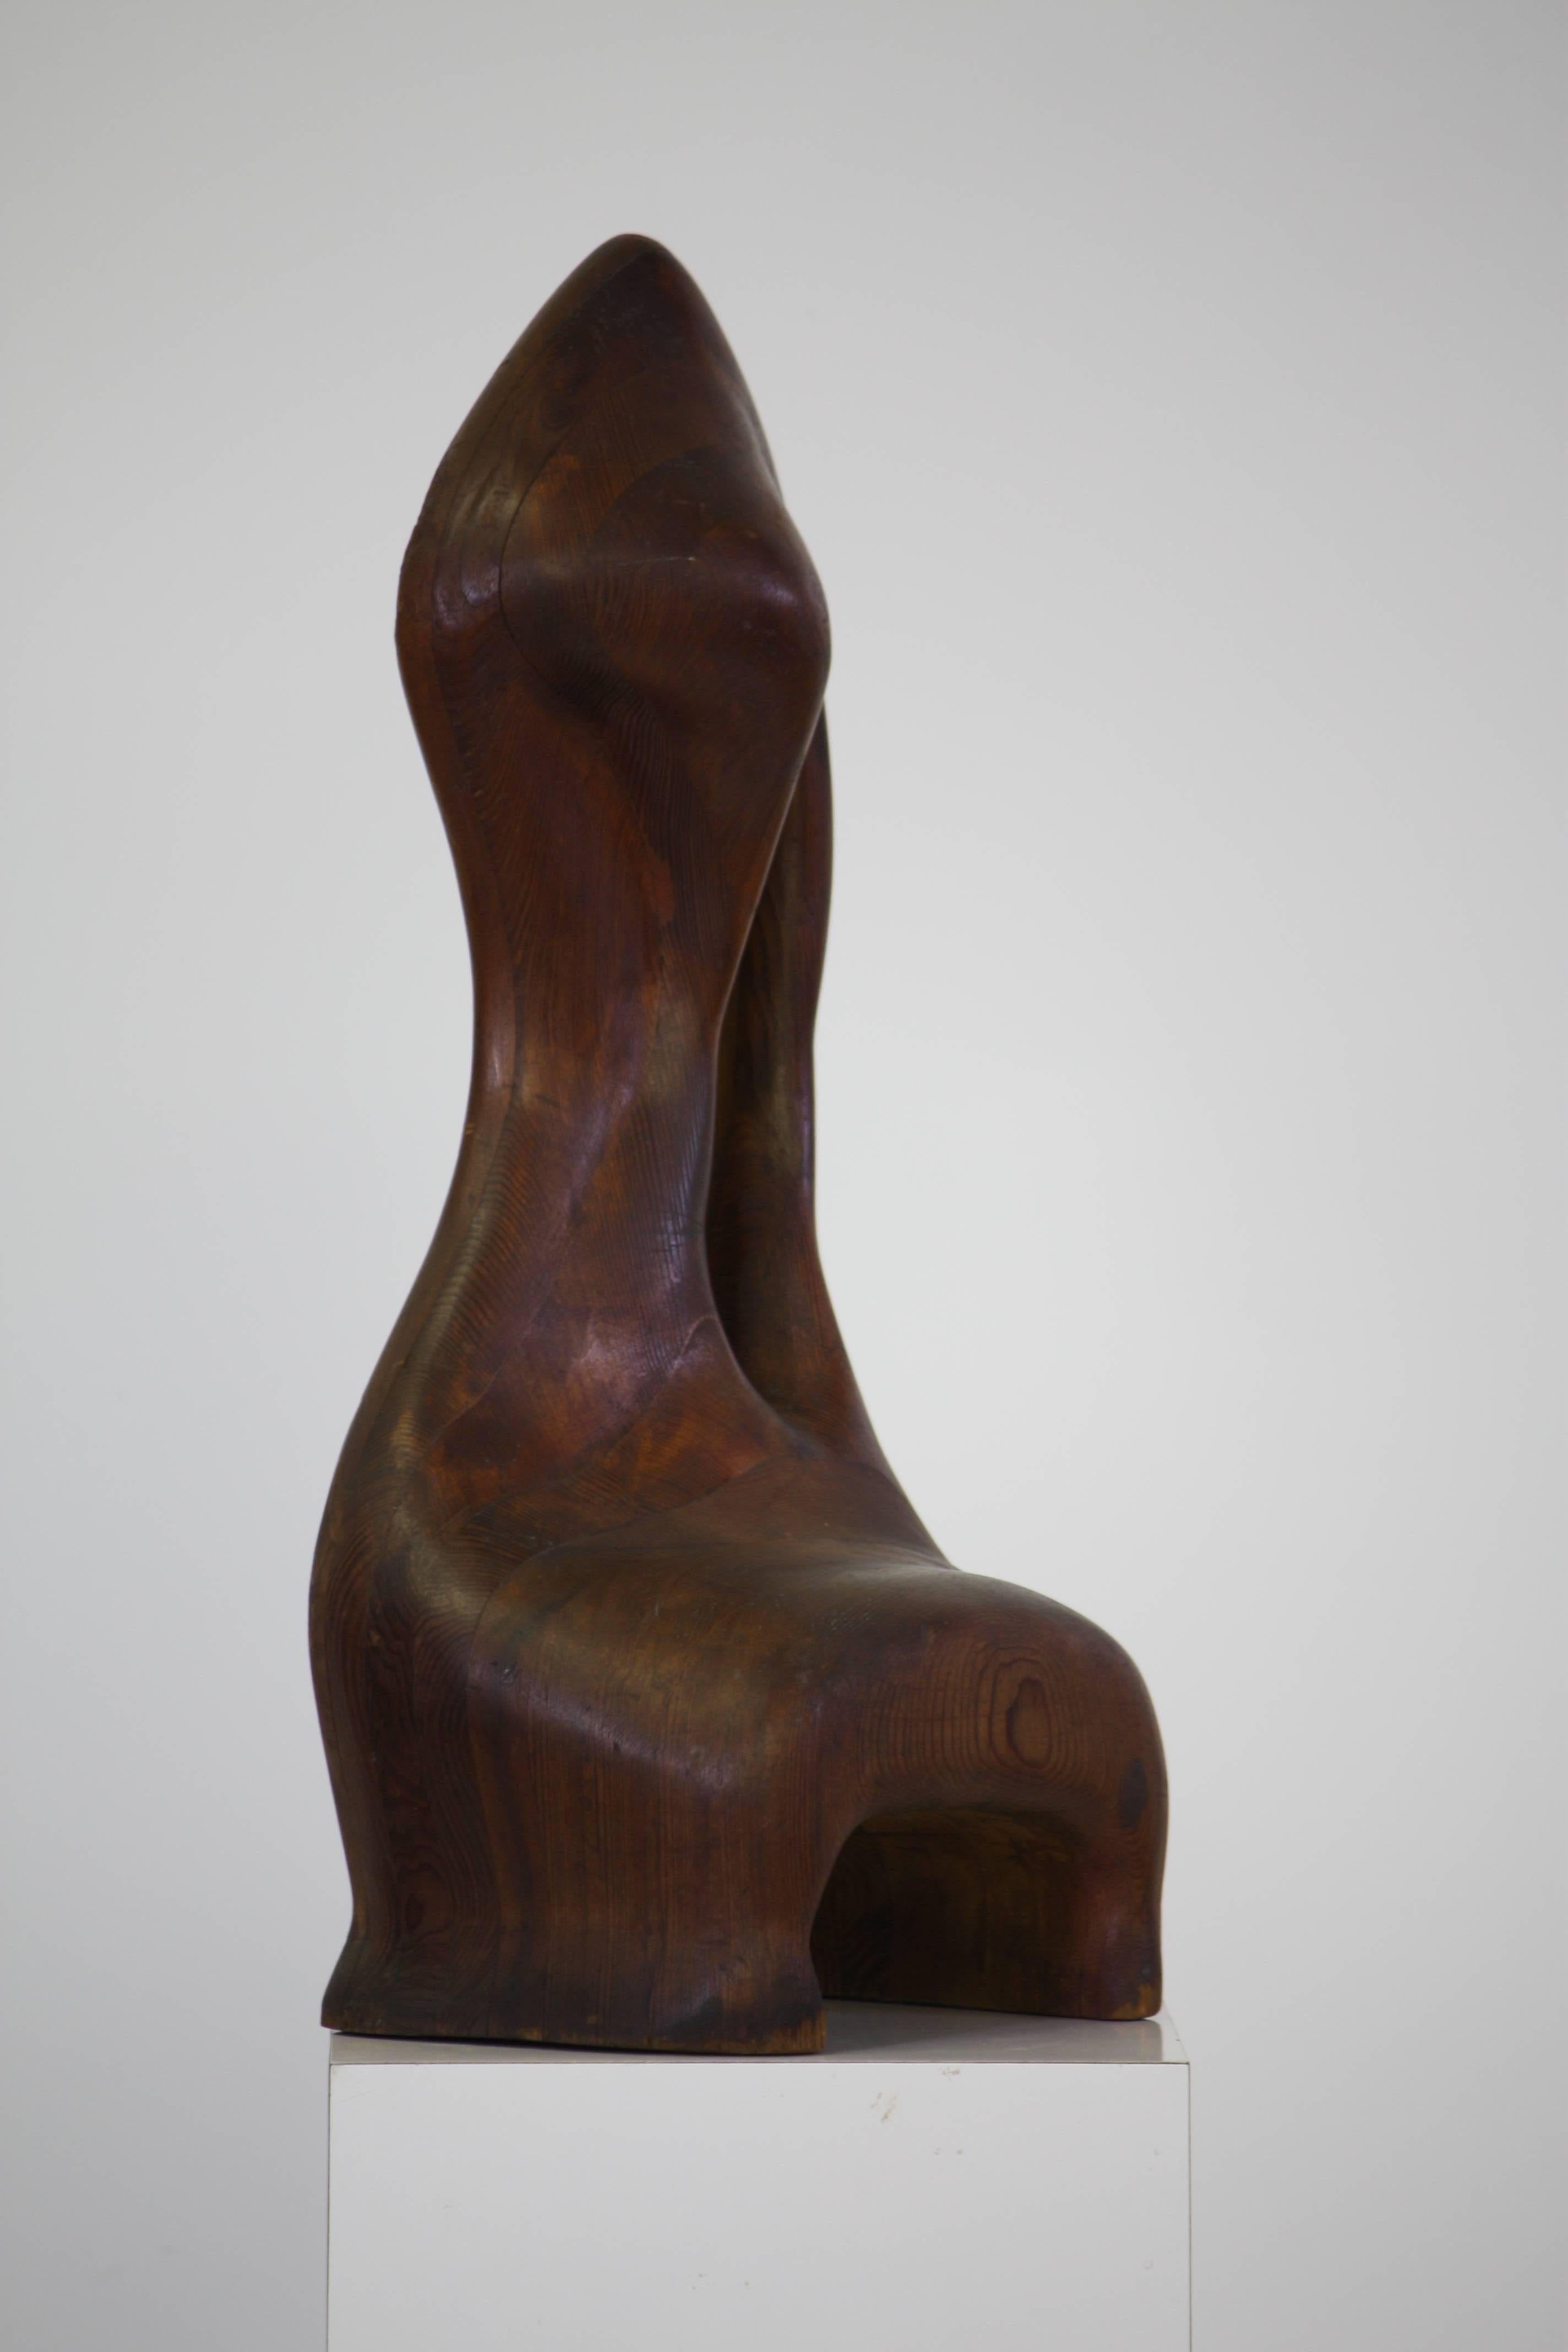 Wonderful organic shaped vintage wood table top sculpture. This hand-carved pieces is made of layers and emulates the work done by Wendell Castle. From the curated collection Space 20th Century.